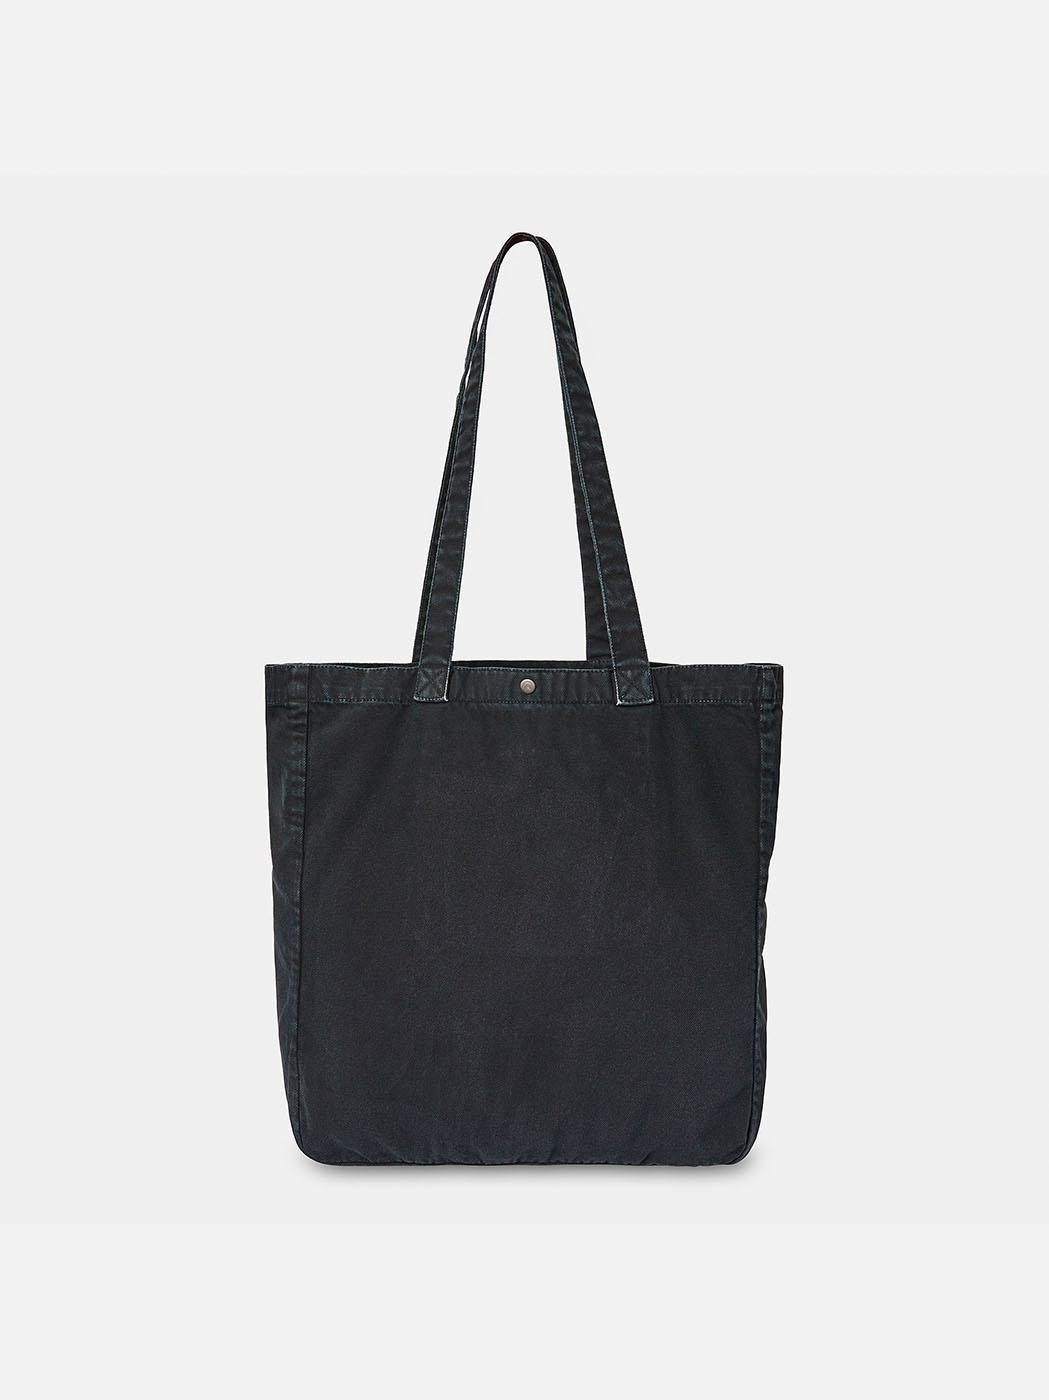 Bolso Carhartt Wip Garrison Tote negro mujer y hombre